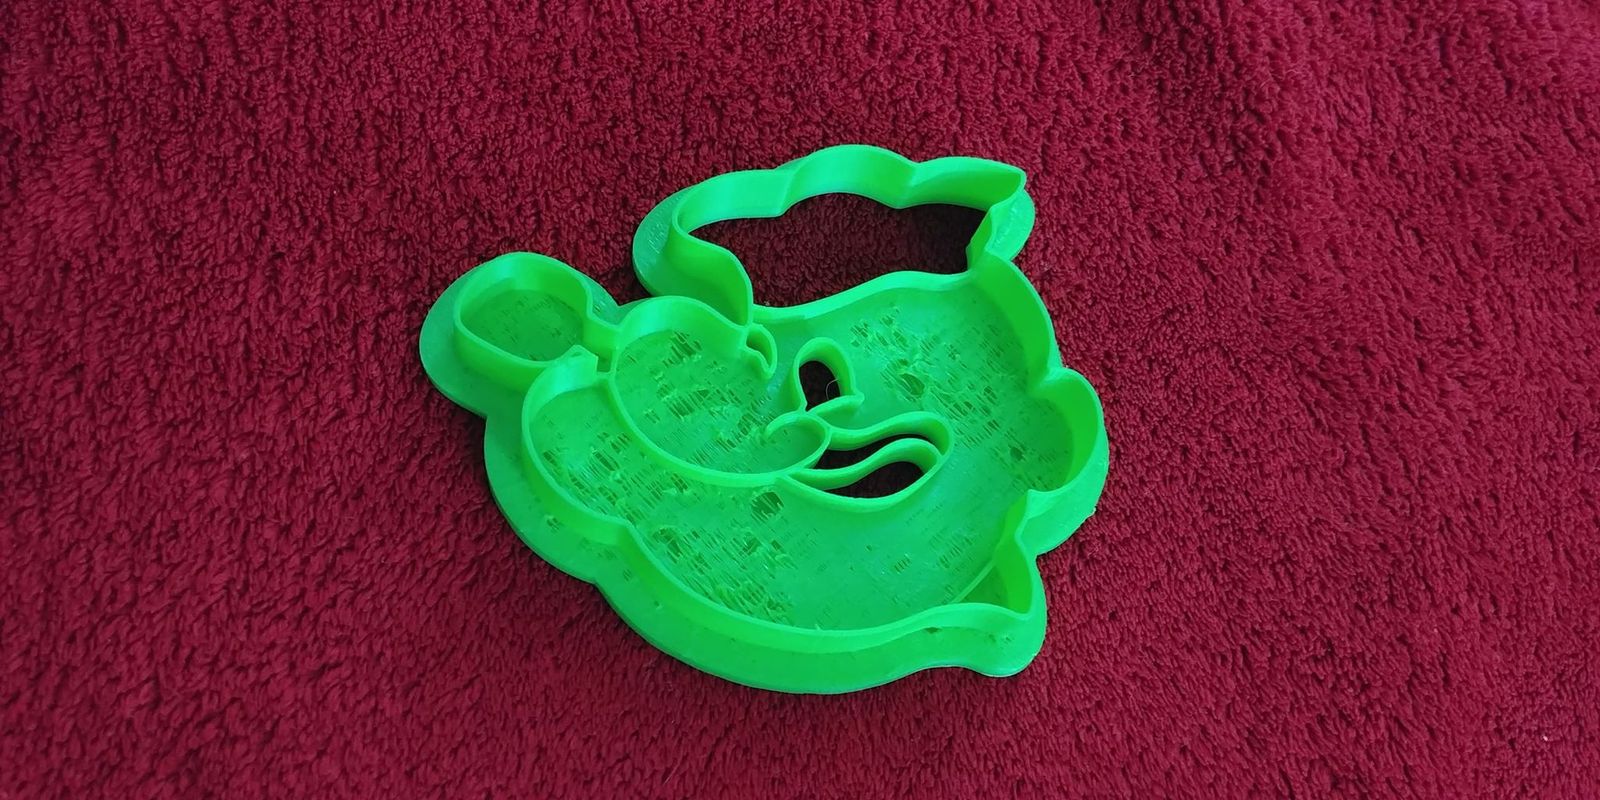 3D Printed Fan Art Cookie Cutter Inspired by Popey the Sailor